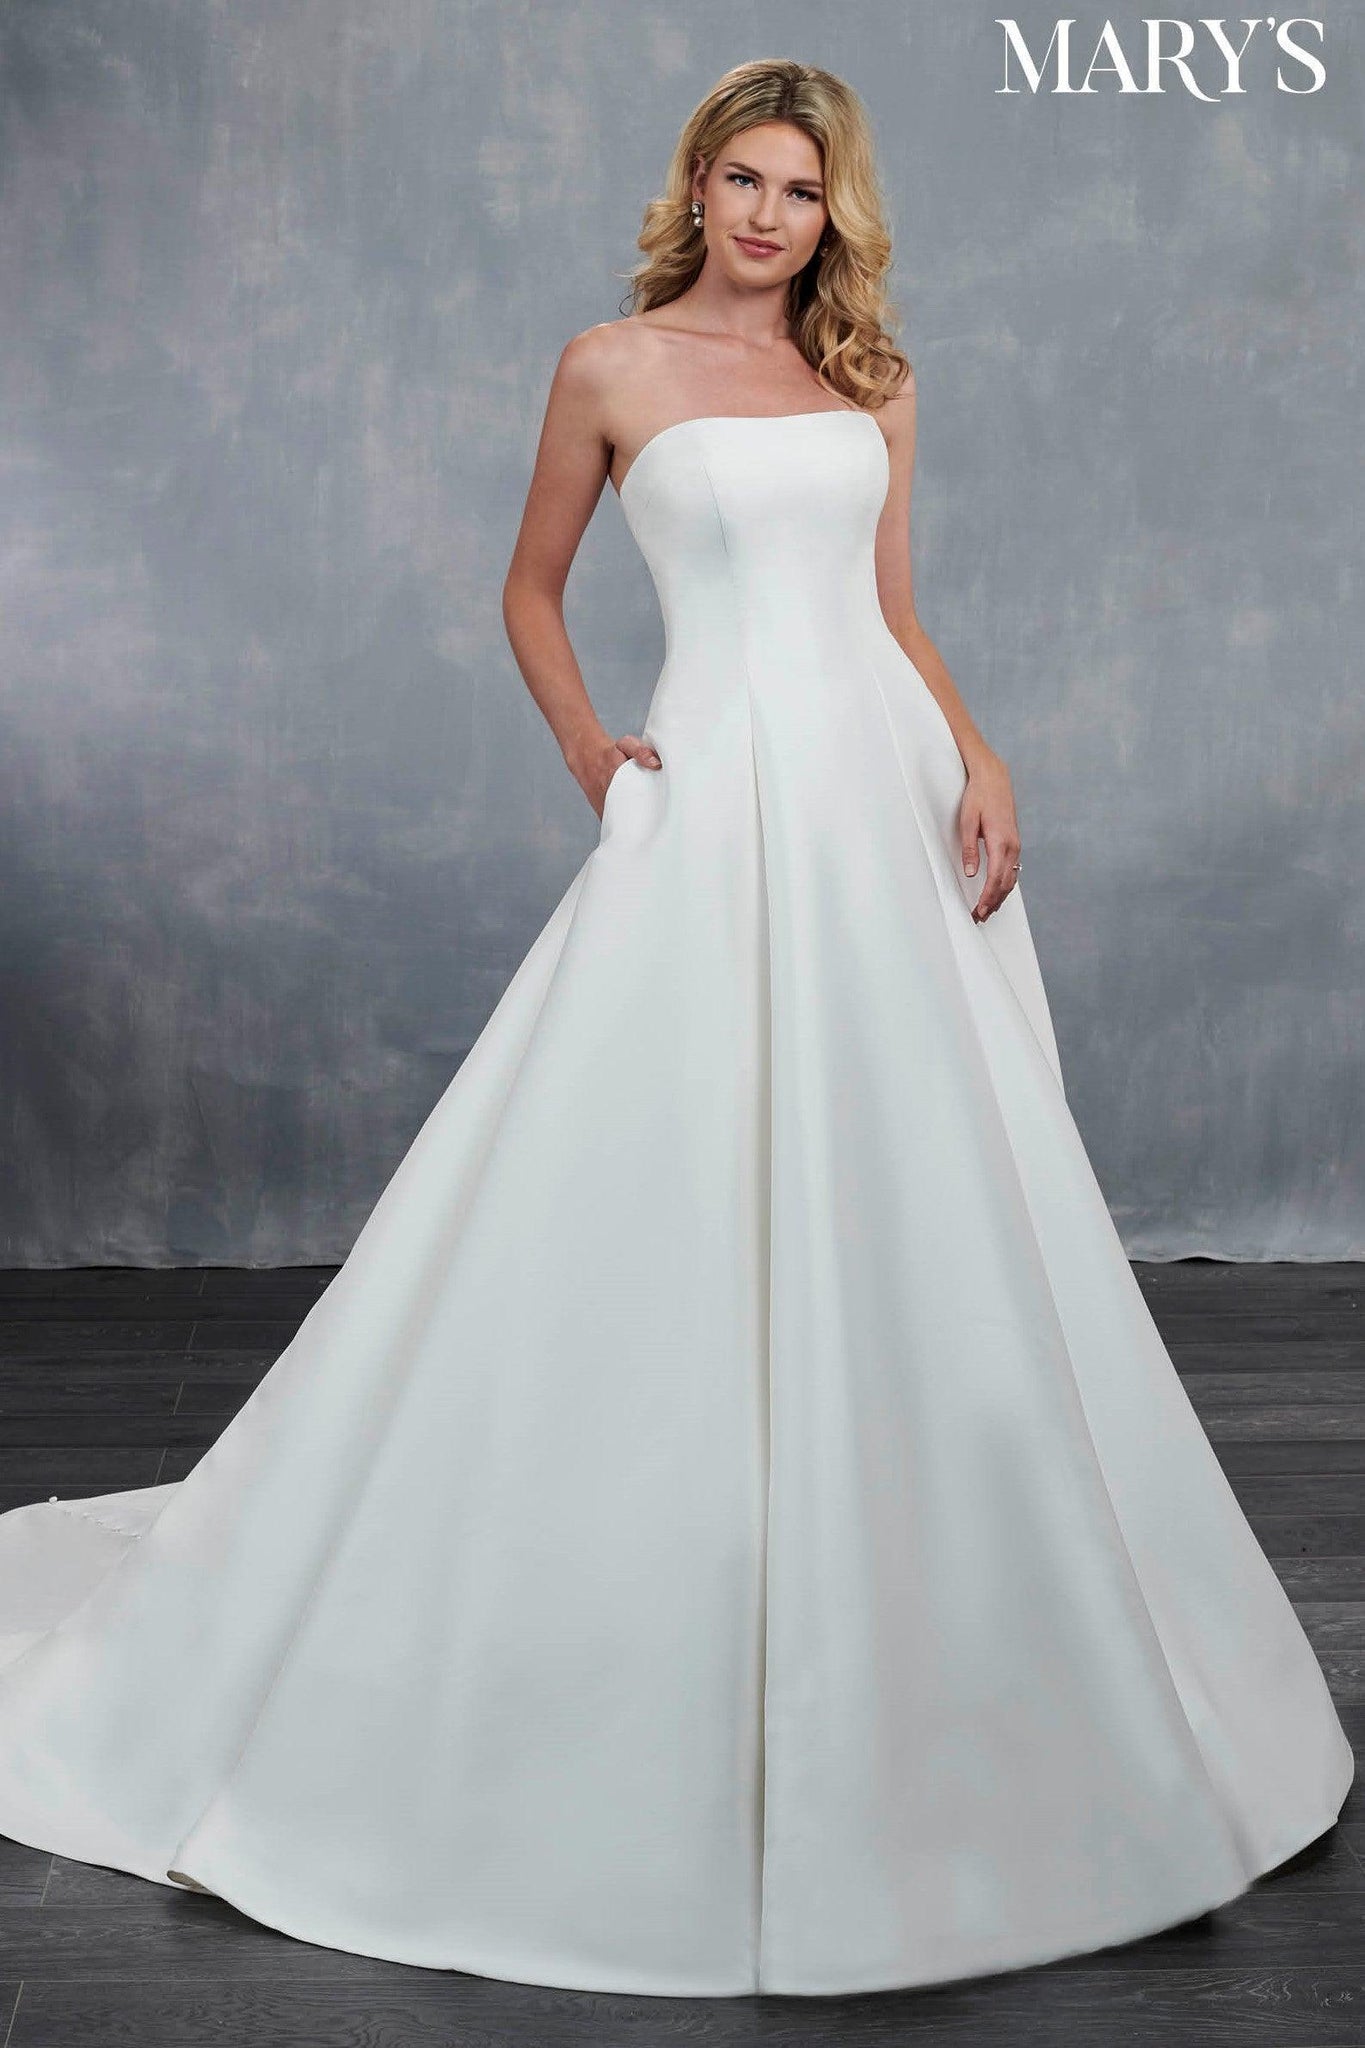 MARY'S BRIDAL - Constance - Adore Bridal and Occasion Wear